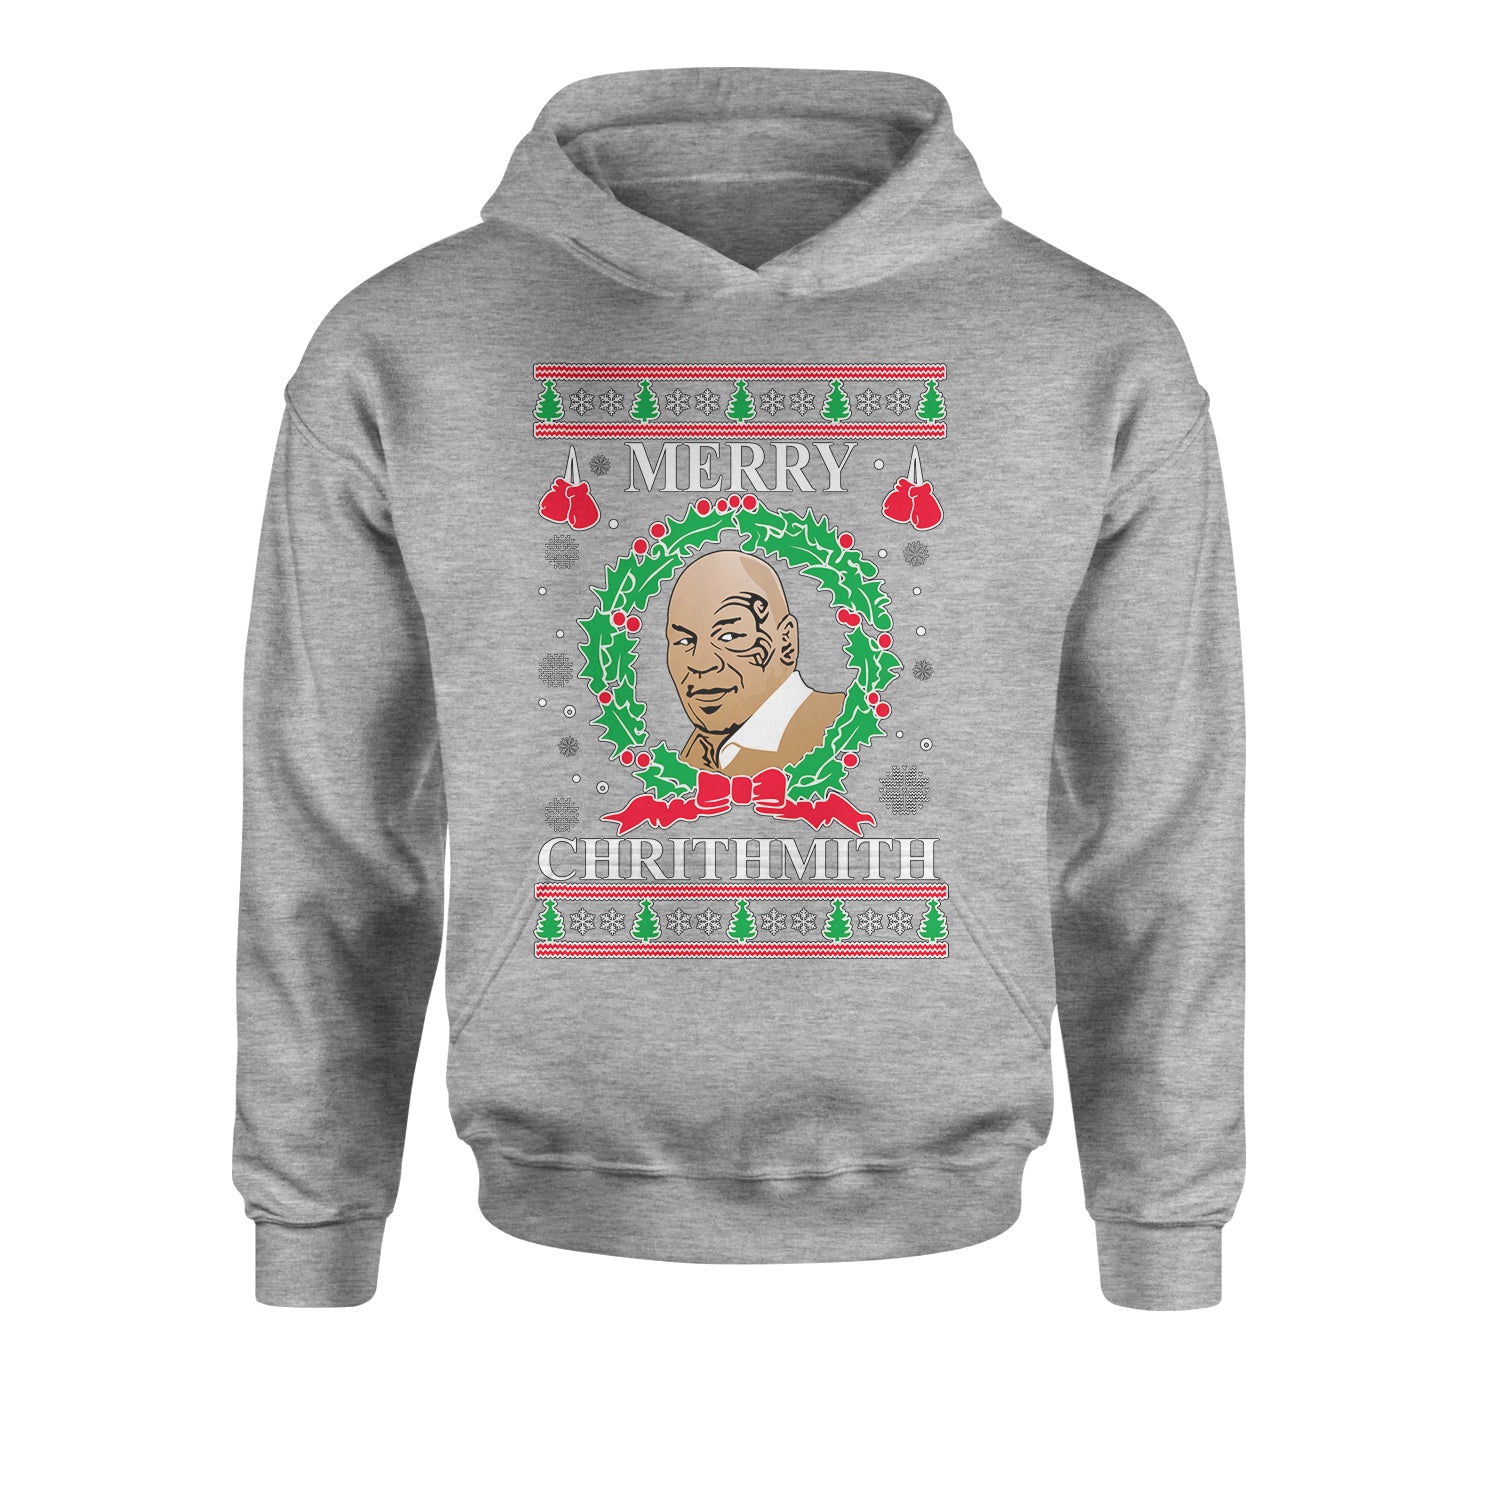 Merry Chrithmith Ugly Christmas Youth-Sized Hoodie christmas, holiday, michael, mike, sweater, tyson, ugly by Expression Tees